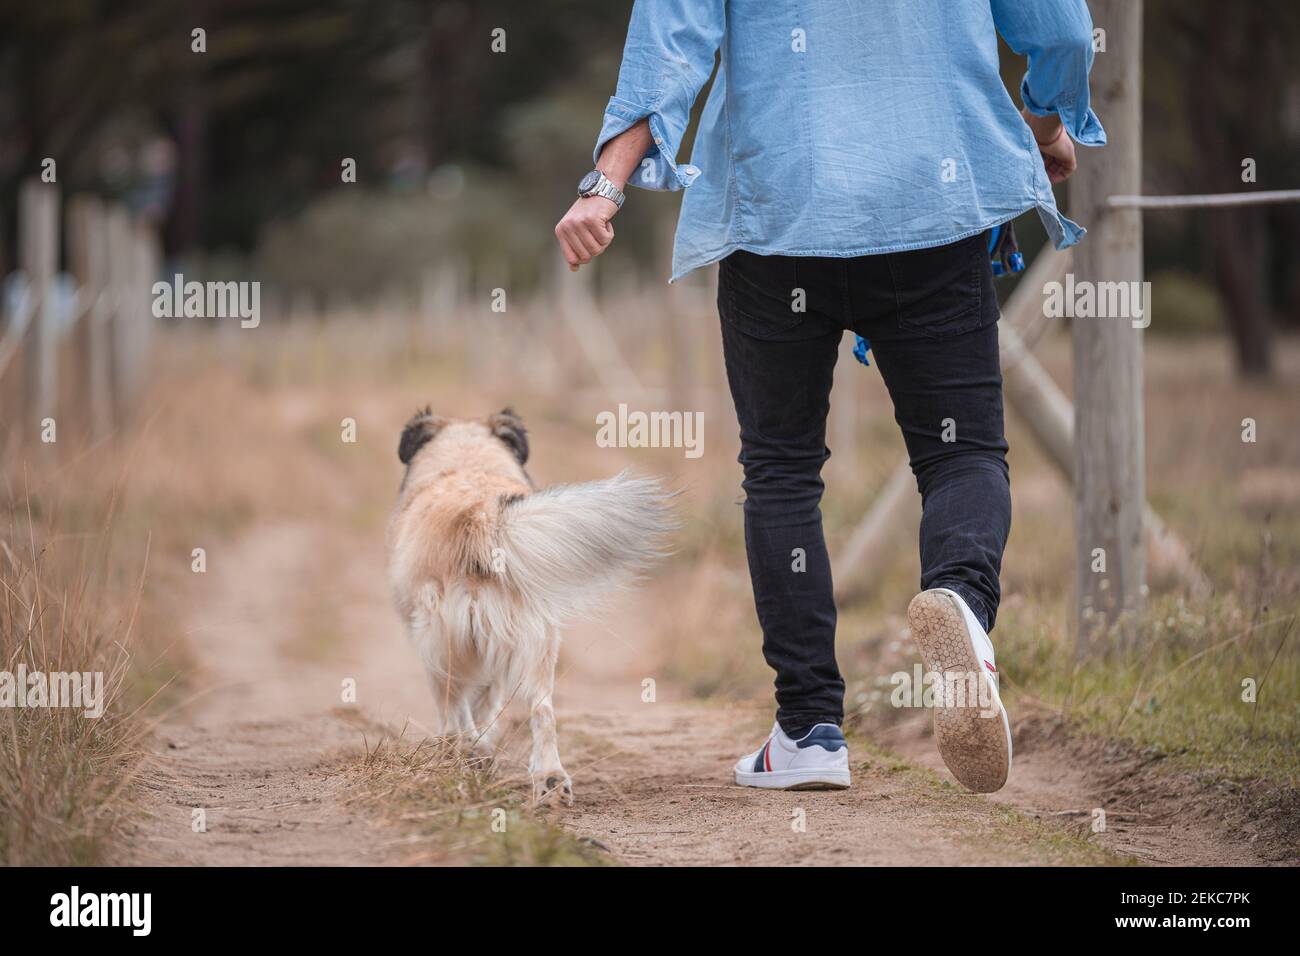 Man walking with dog on dirt road Stock Photo